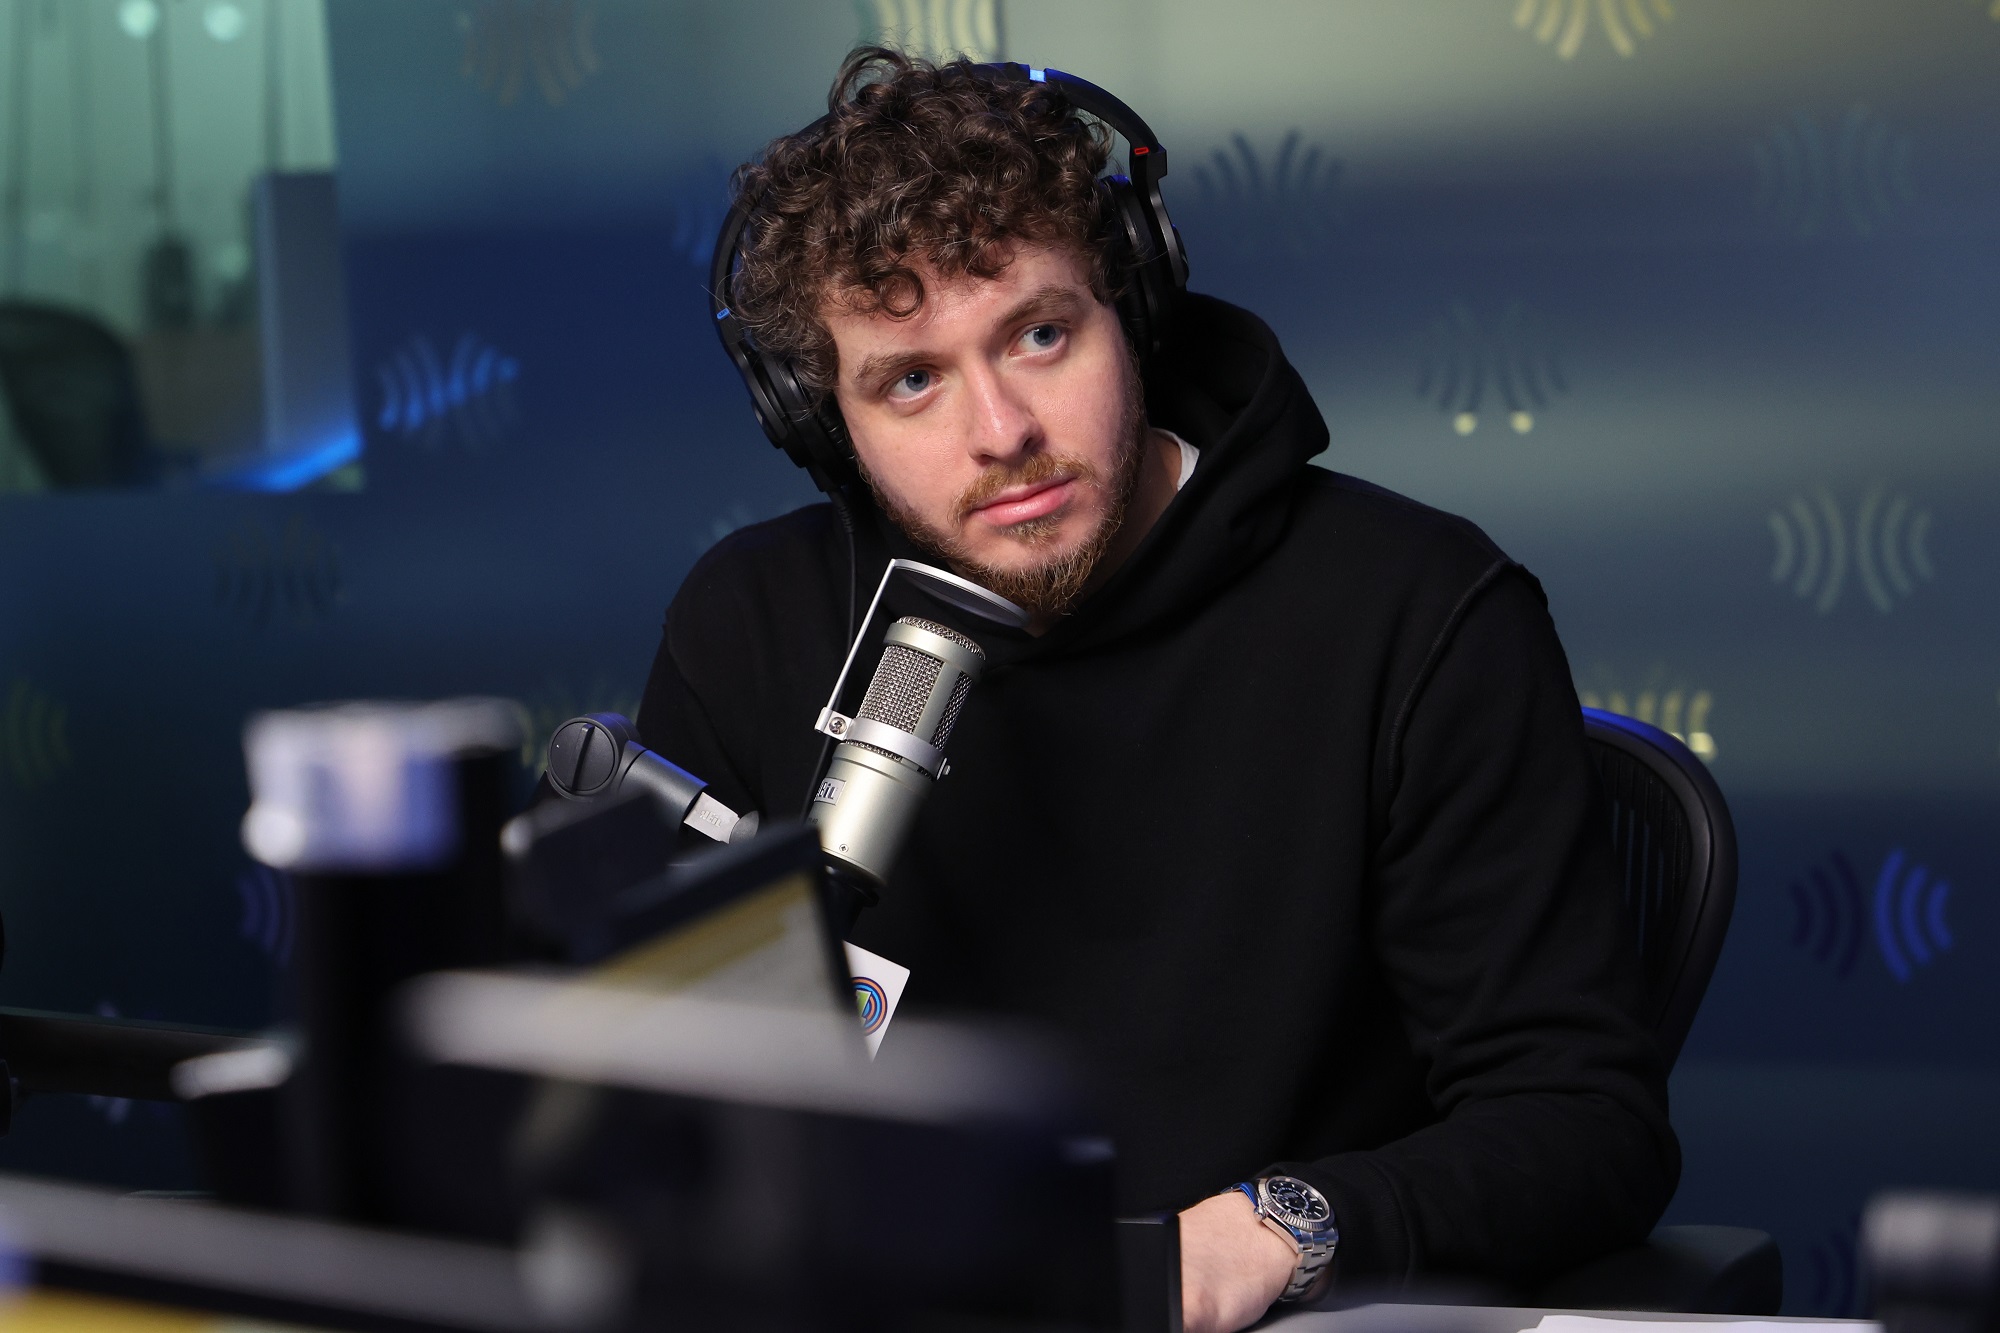 Jack Harlow visits SiriusXM's 'Morning Mash Up' leading up to the release of his album 'Come Home the Kids Miss You'